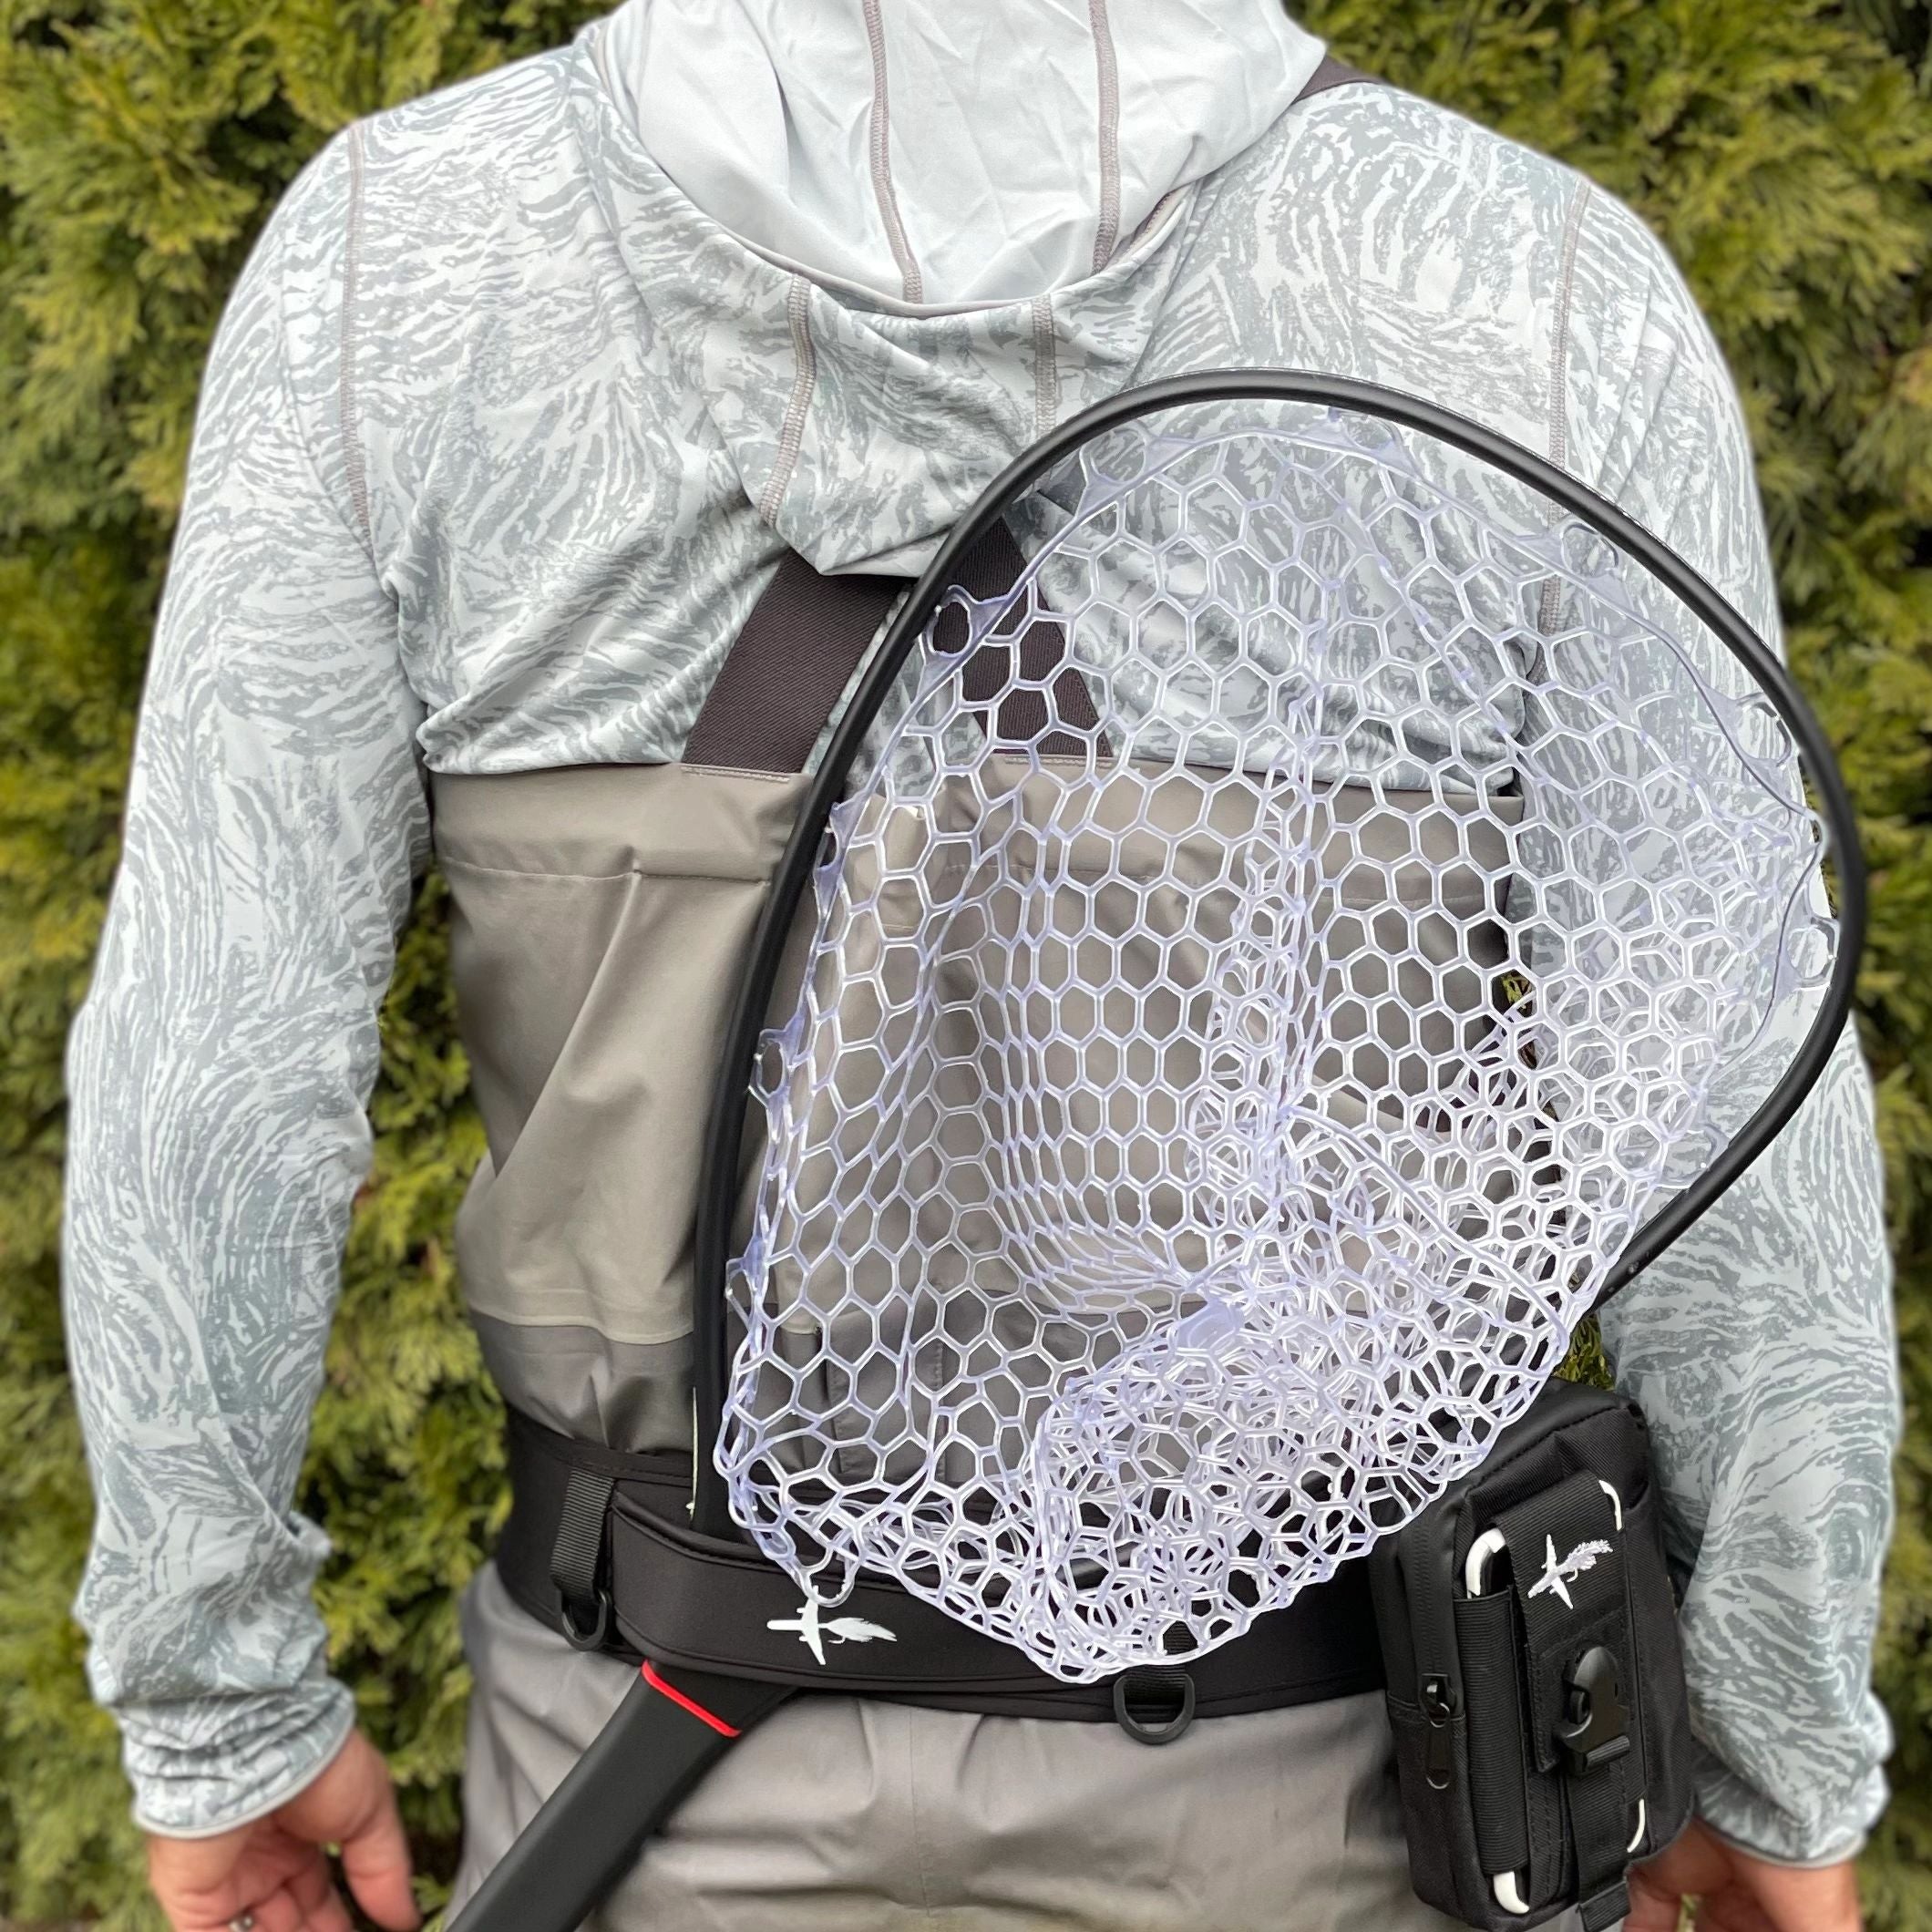 FLY FISHING WADING BELT WITH NET HOLSTER